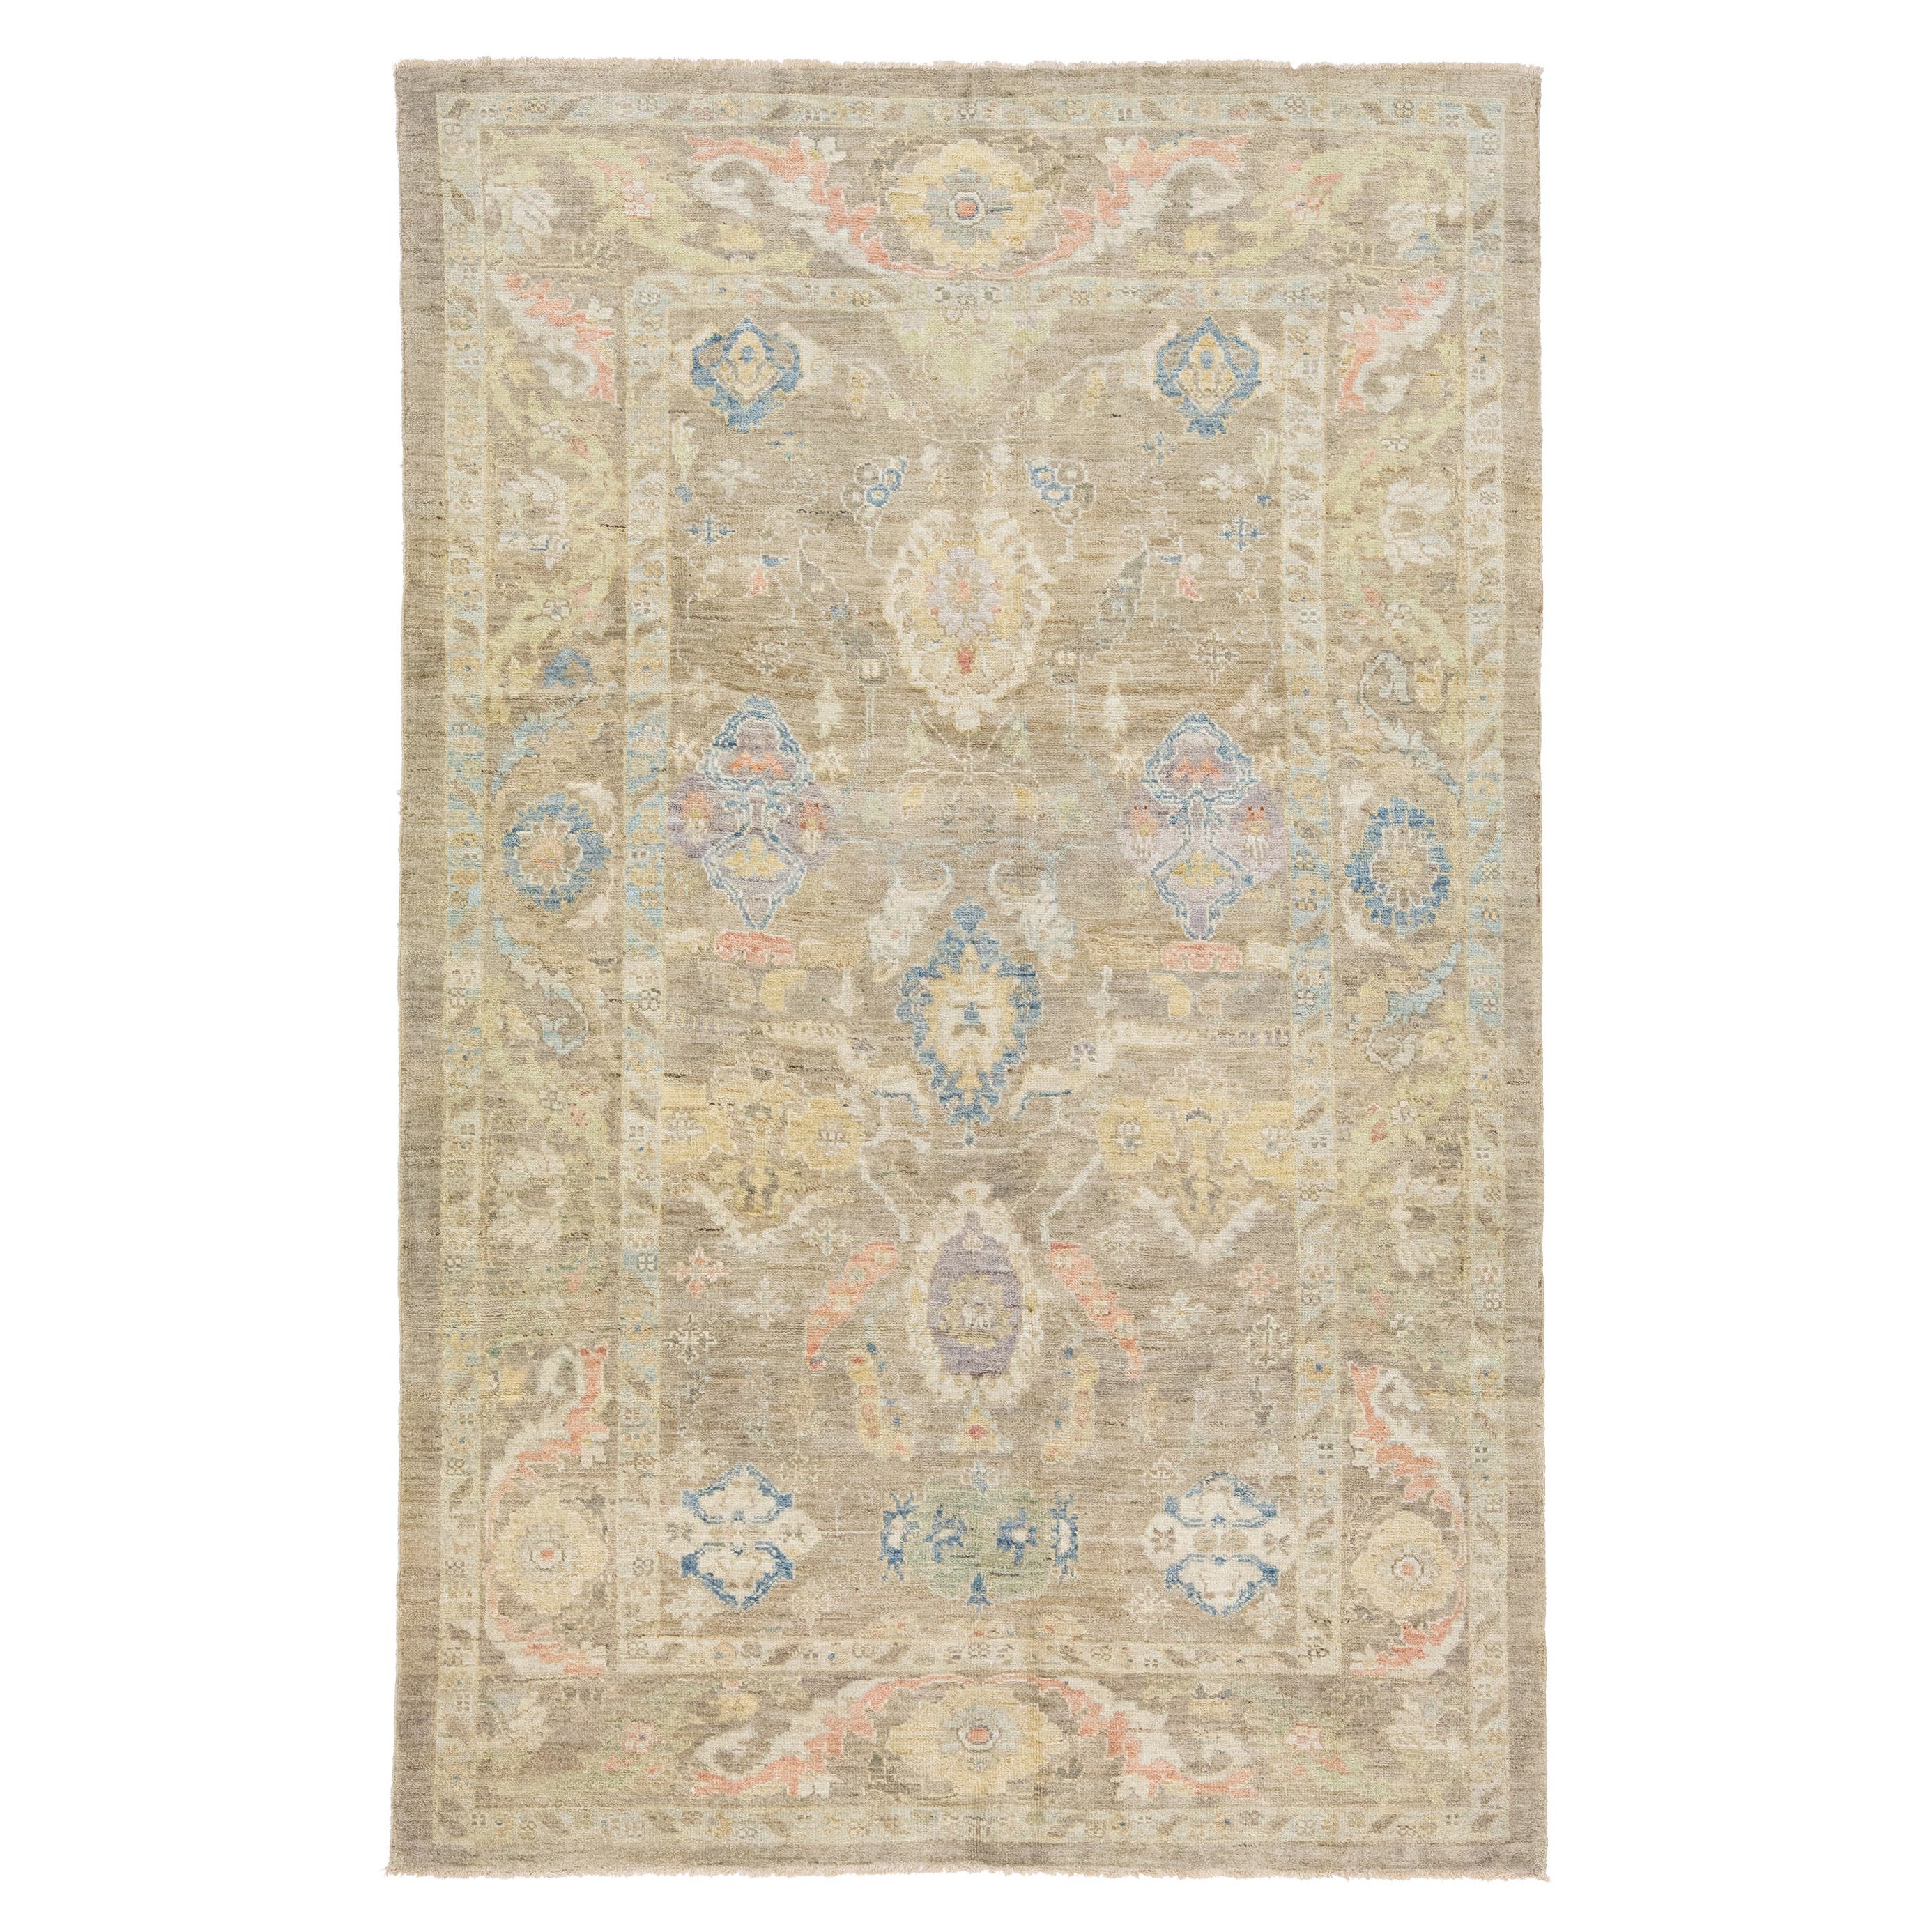 Modern Sultanabad Beige Handmade Room Size Wool Rug With Floral Motif